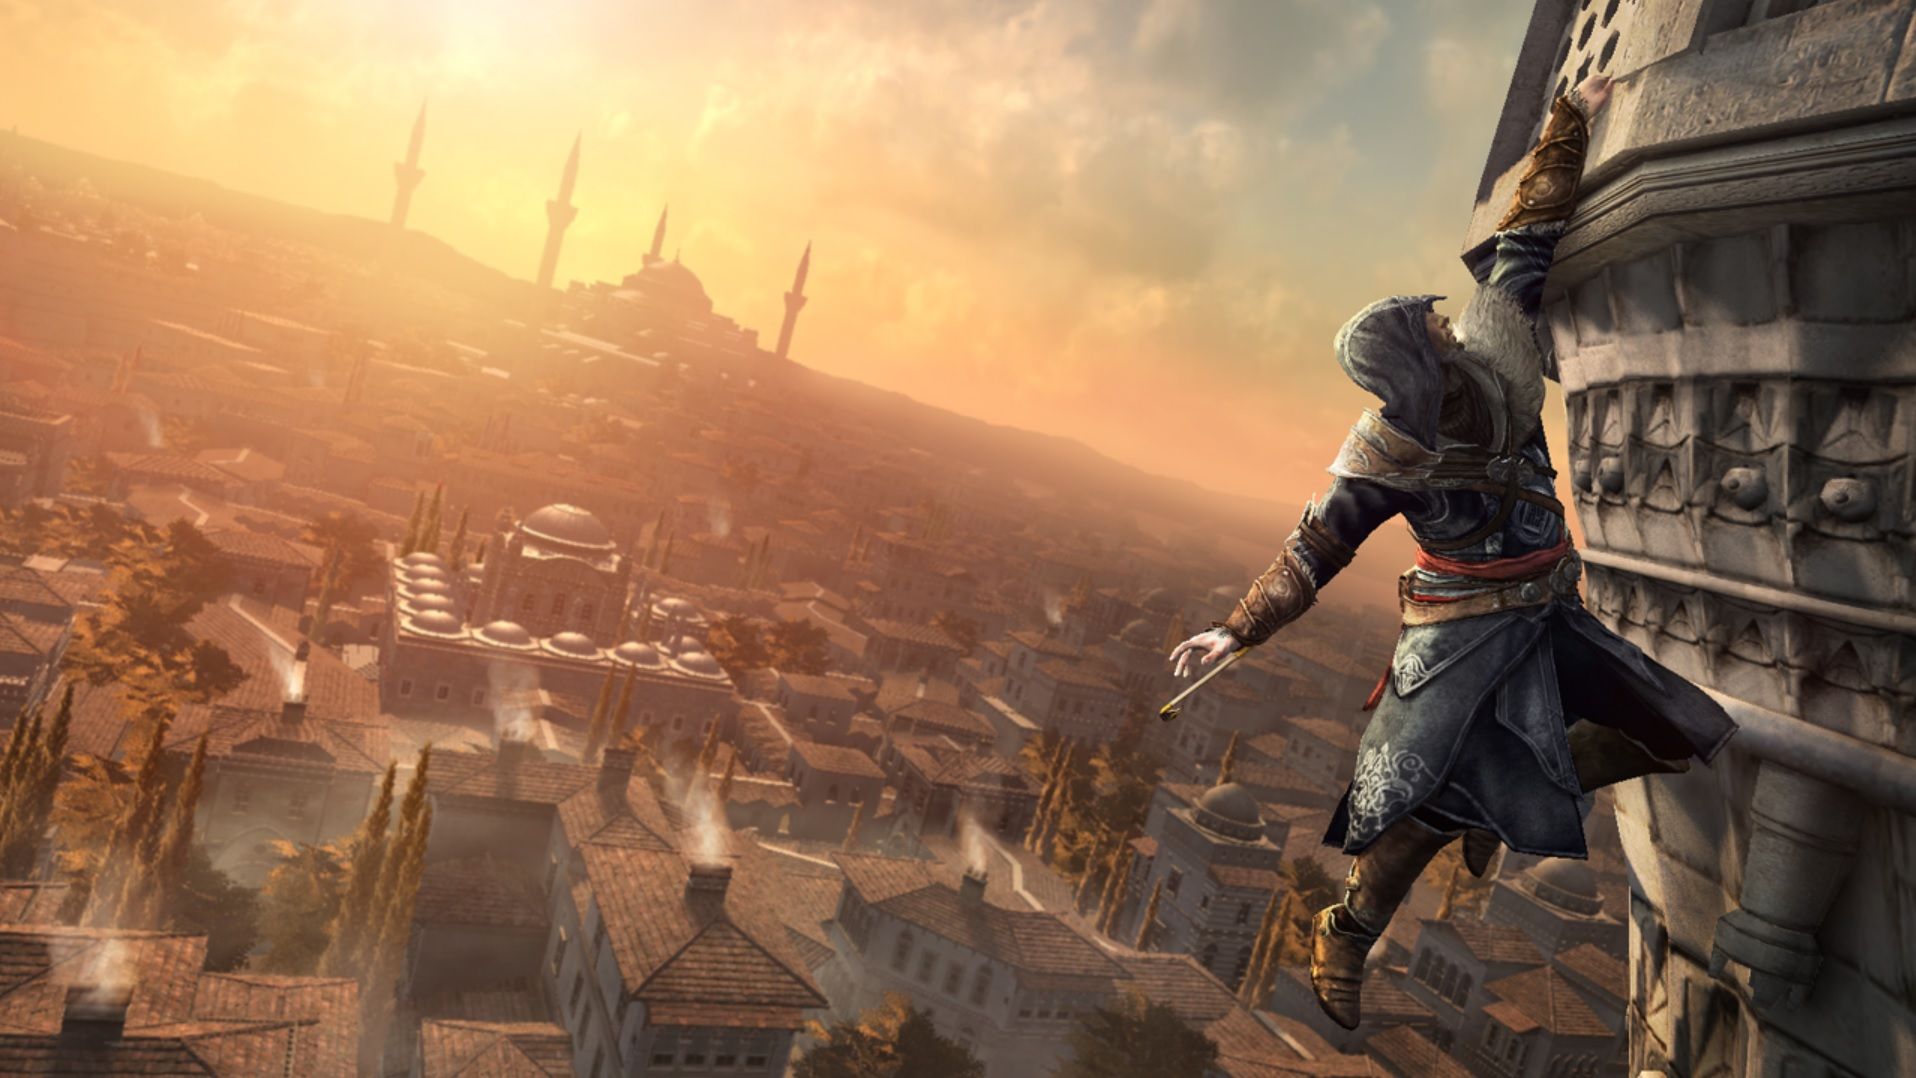 Assassins Creed Timeline All Major Events and Characters Explained